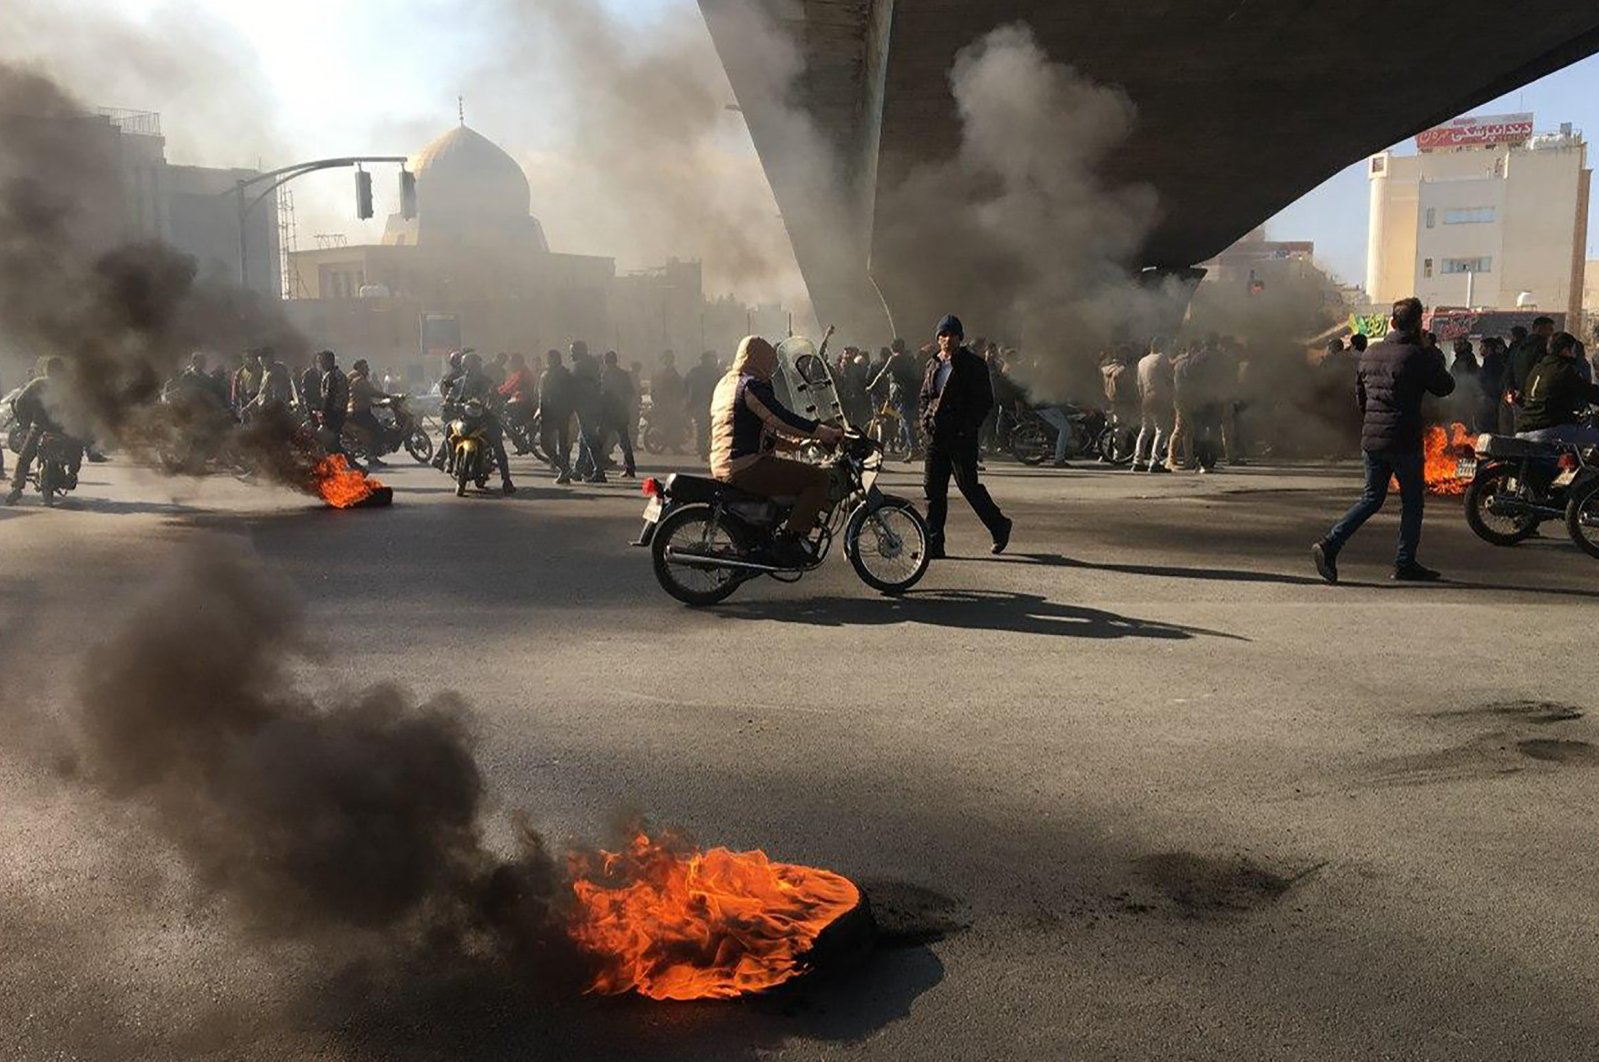 Iranian protesters rally amid burning tires during a demonstration against an increase in gasoline prices, Isfahan, Iran, Nov. 16, 2019. (AFP Photo)